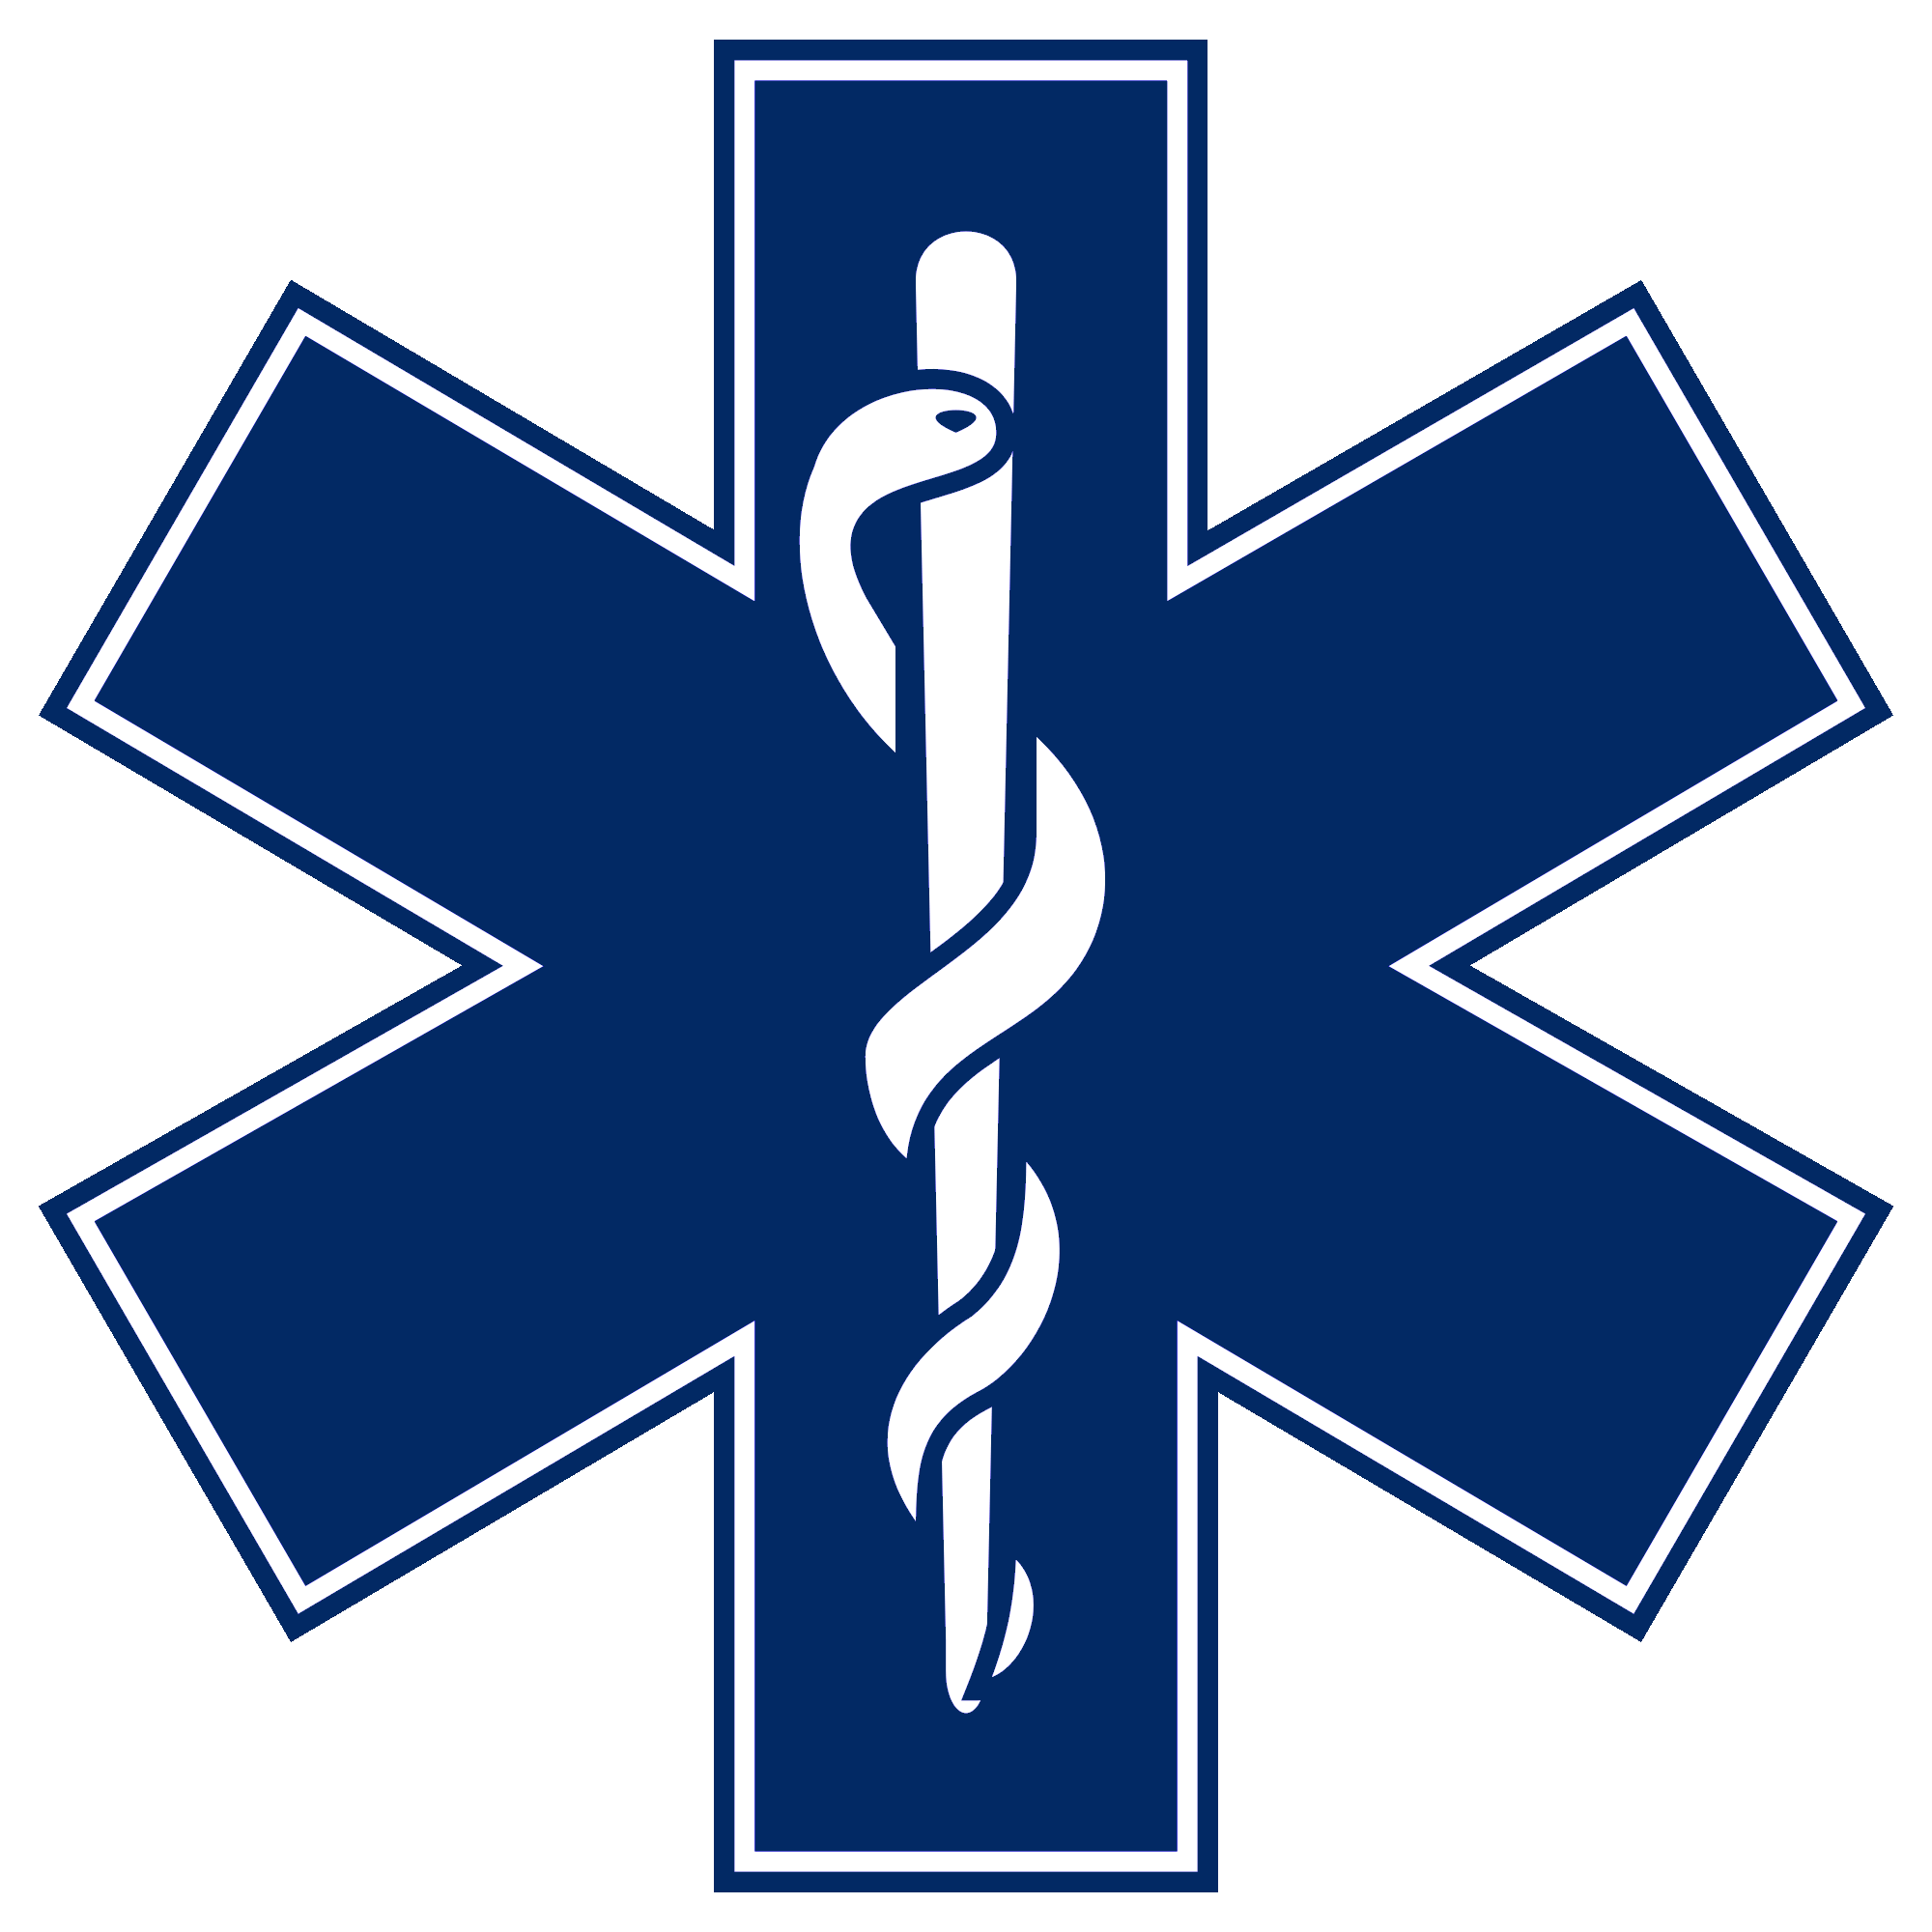 kisspng-star-of-life-emergency-medical-services-emergency-5b676f0ea71421.2380760815335052946844.png